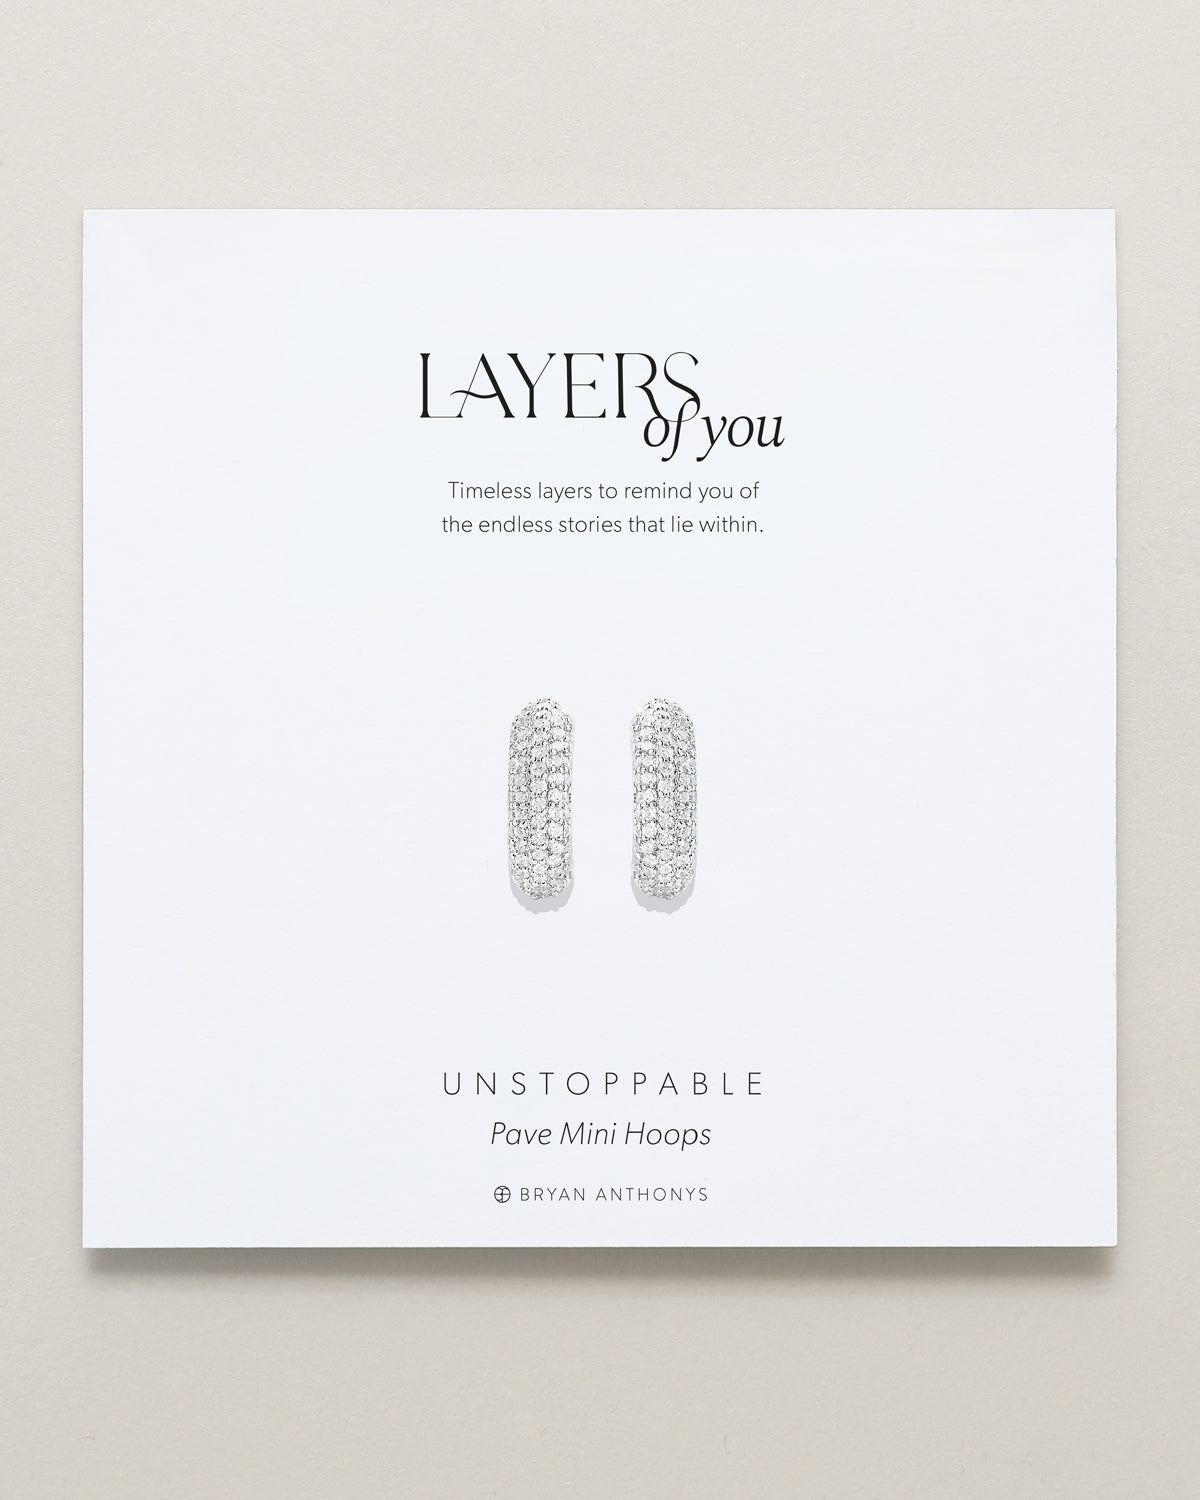 Bryan Anthonys Layers of You Gold Unstoppable Pave Hoops On Card